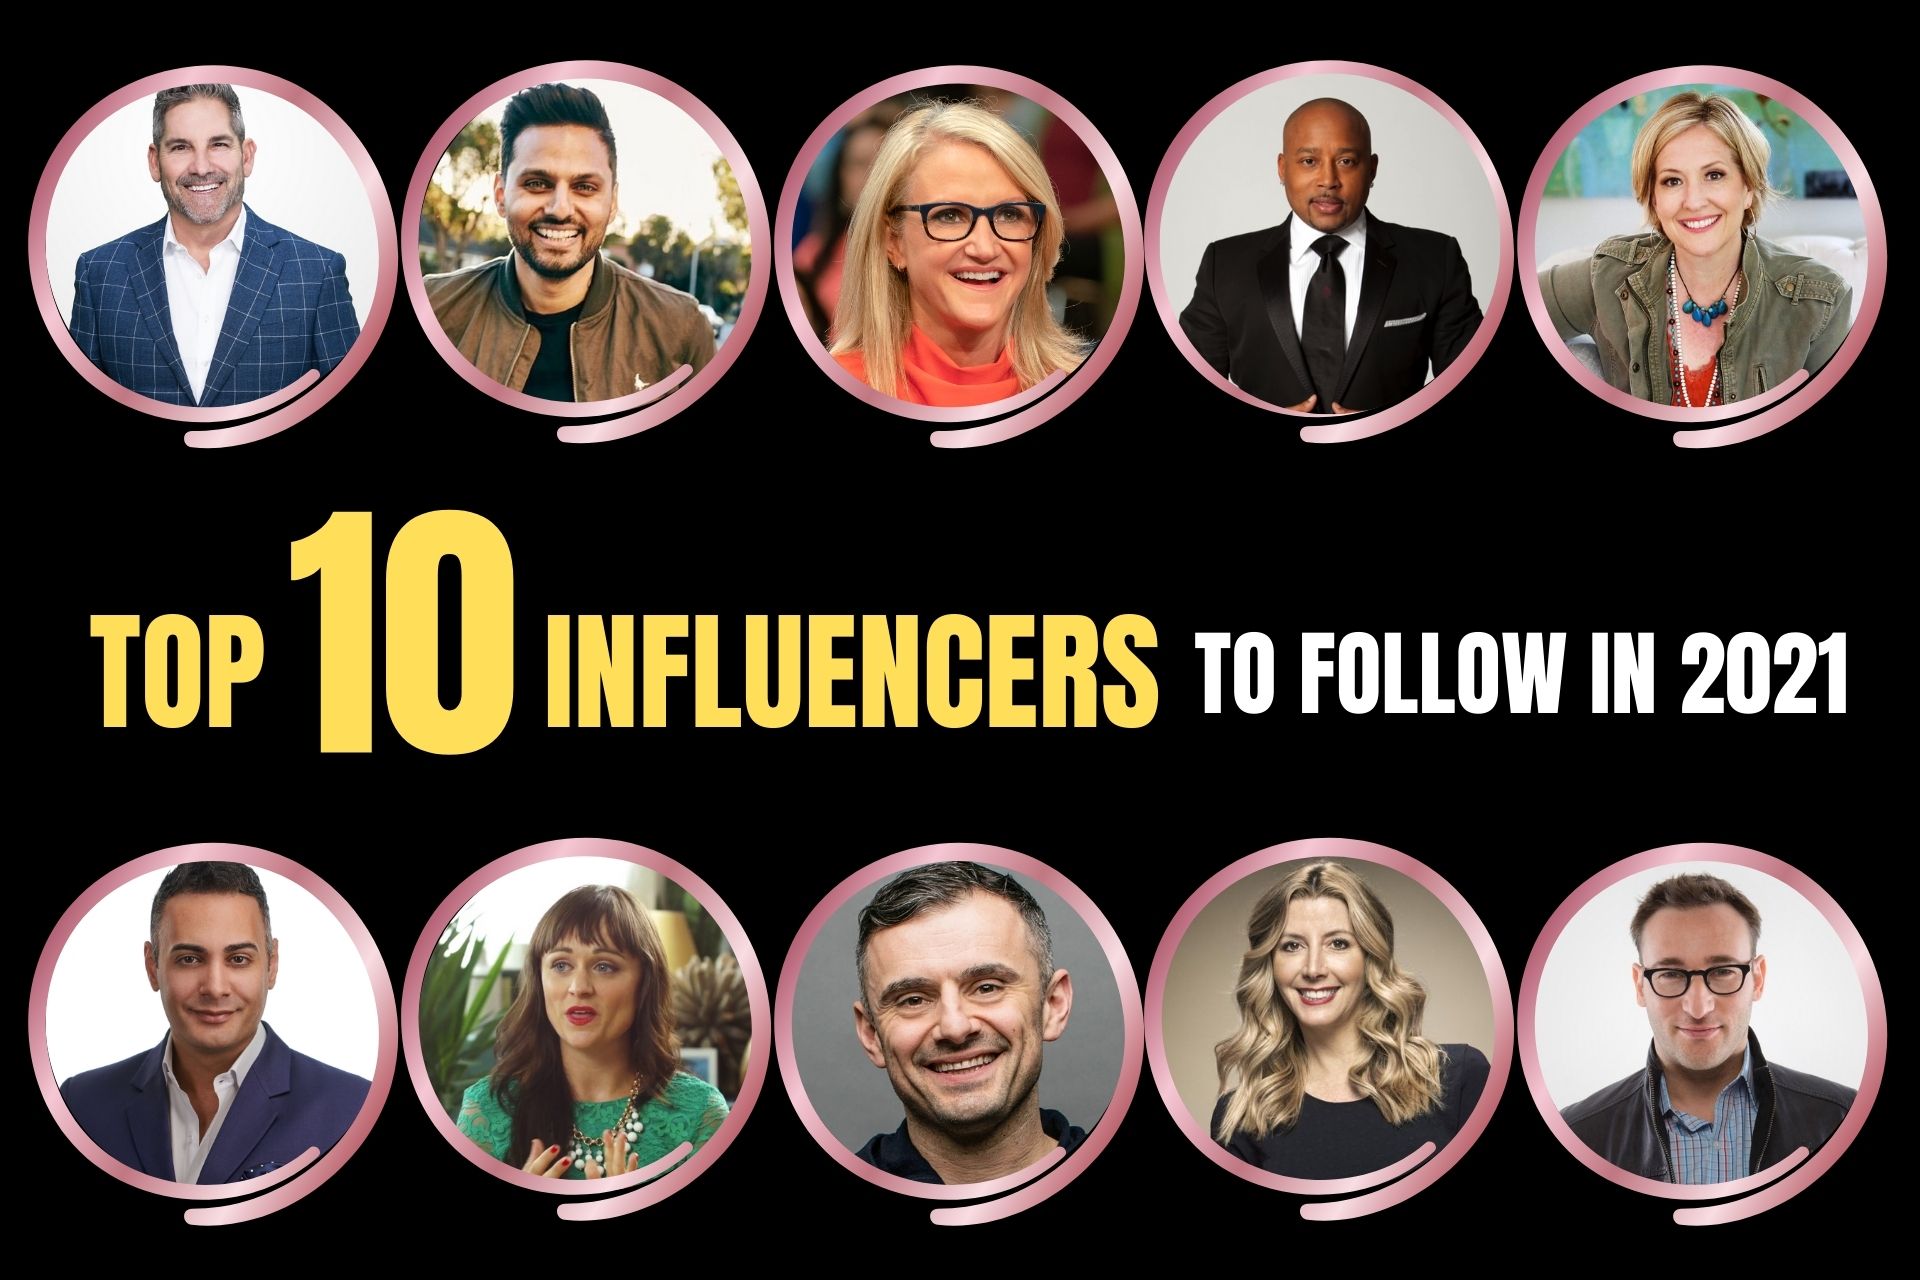 Top 10 Influencers to Follow in 2021 - AffiliateDailyNews.com